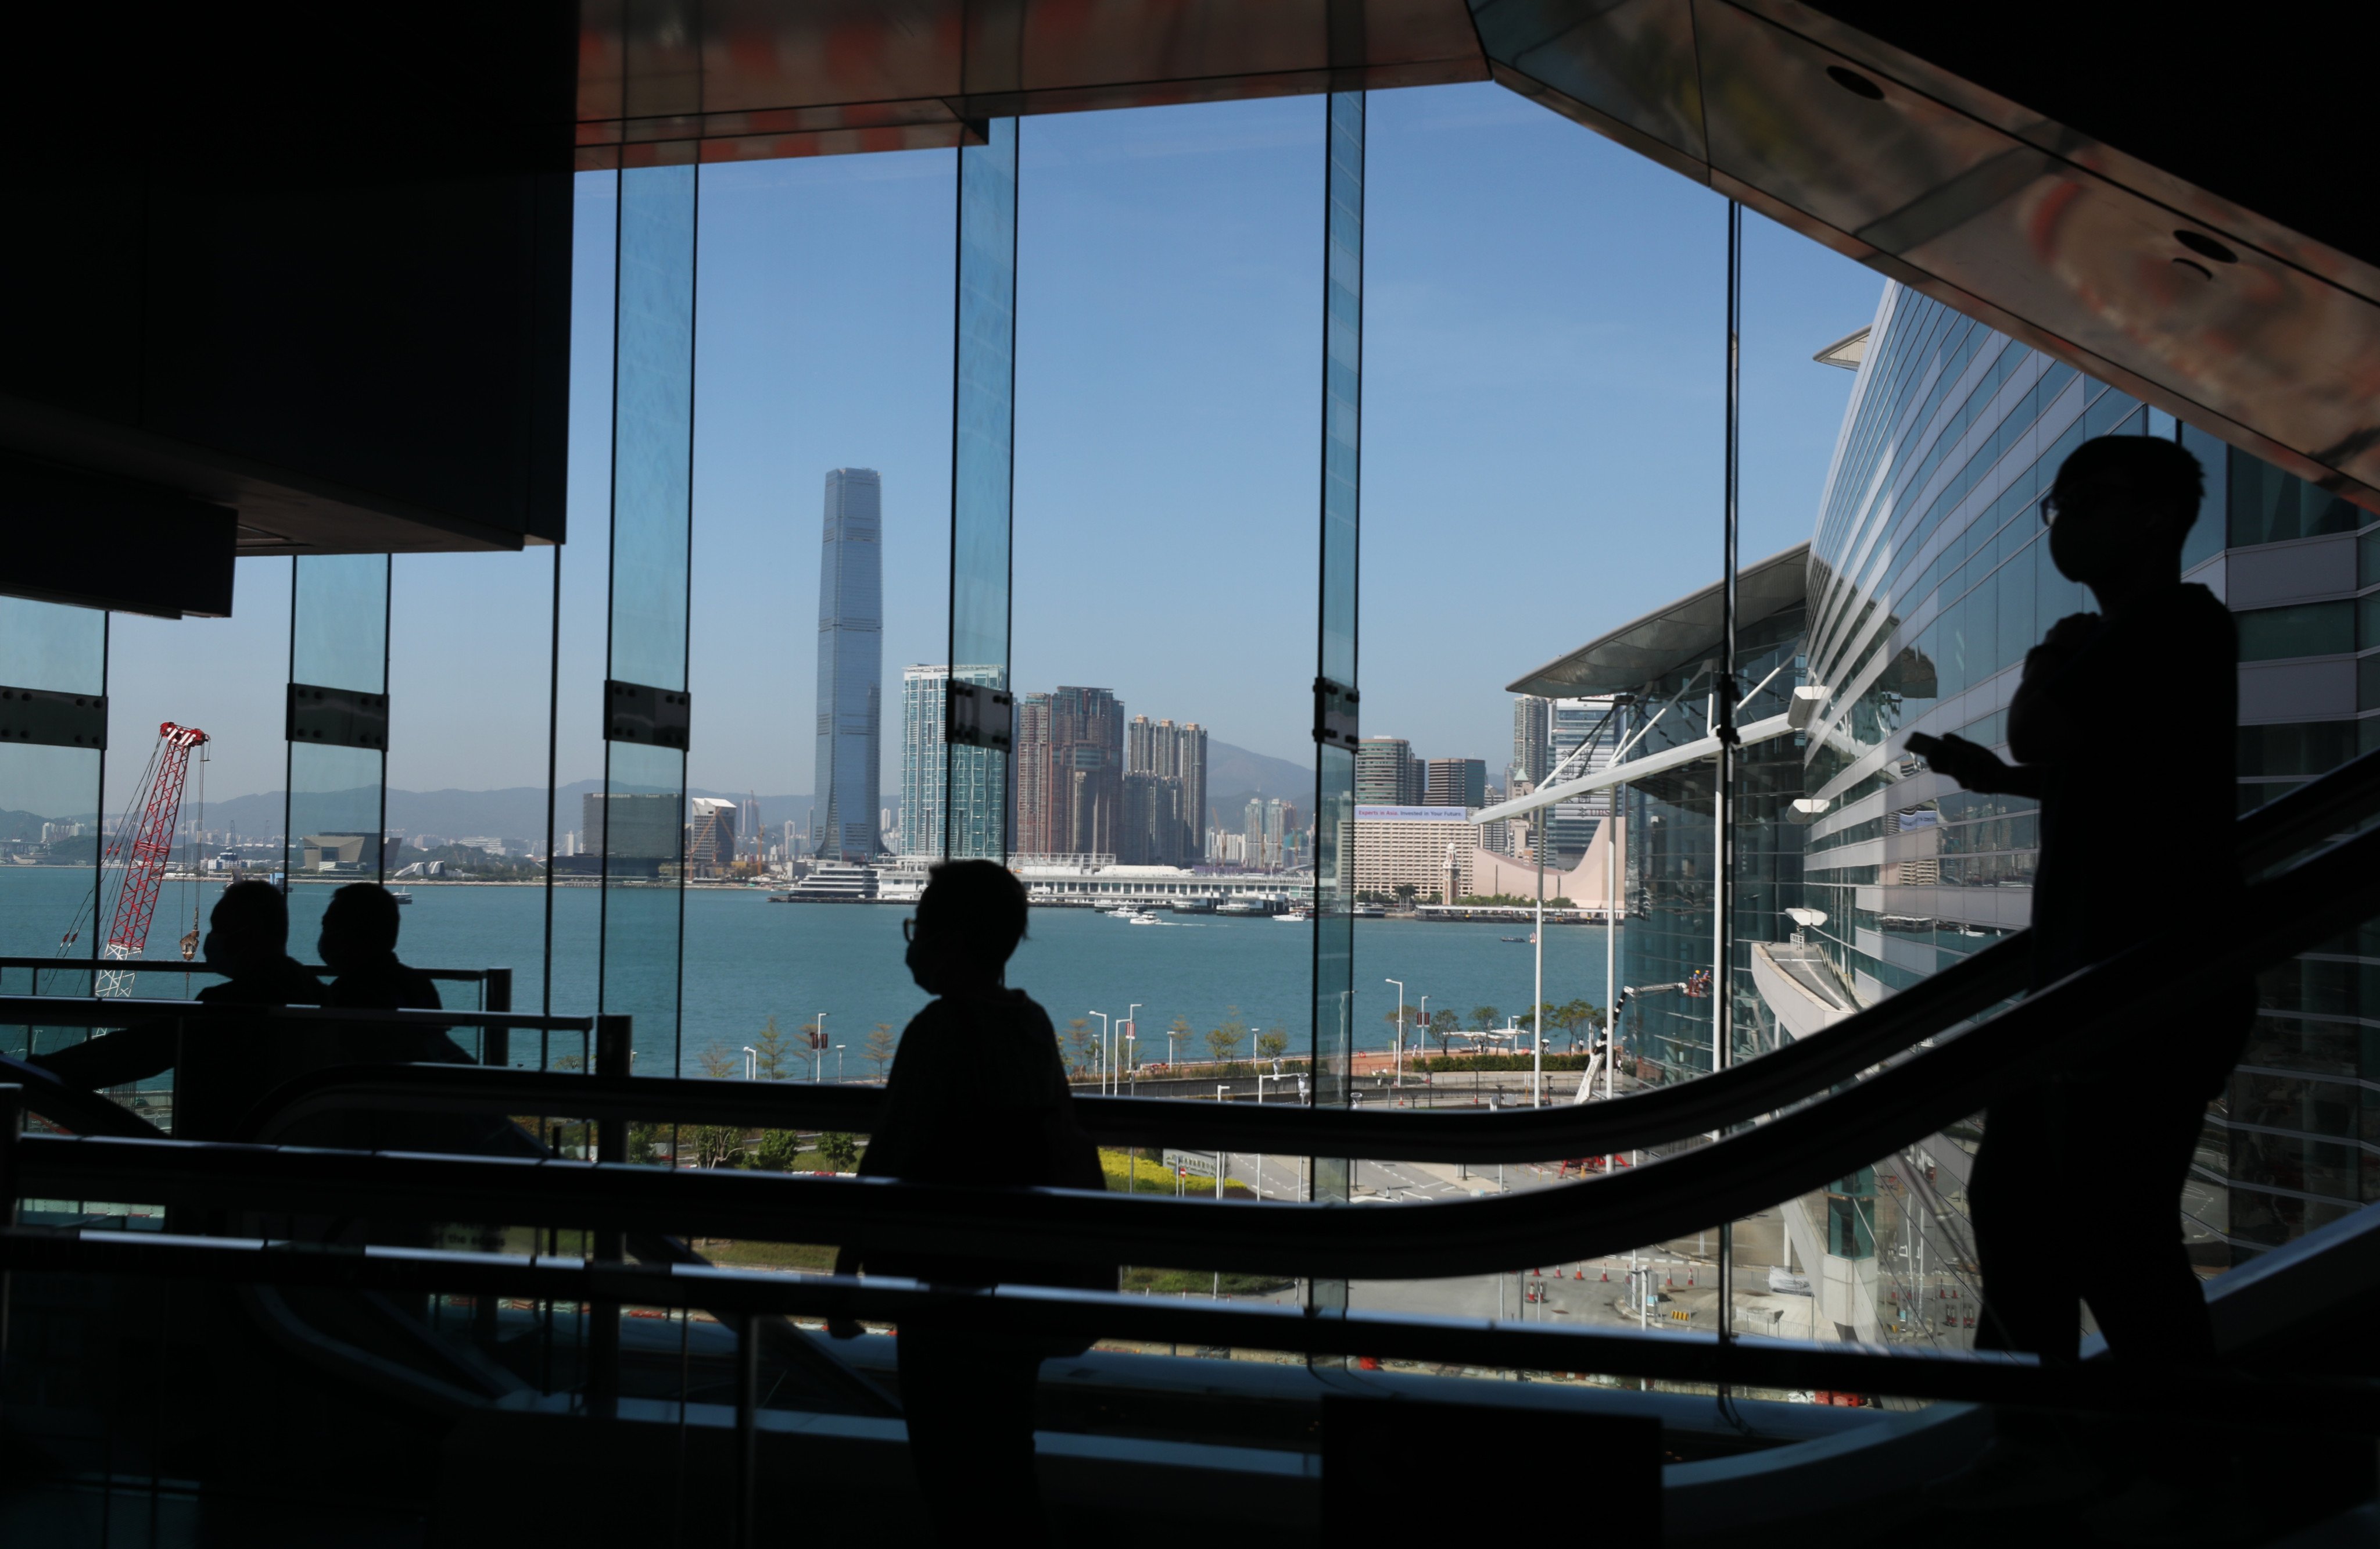 Grade A office rents in Hong Kong fell 2.7 per cent quarter on quarter, according to JLL. Photo: Xiaomei Chen